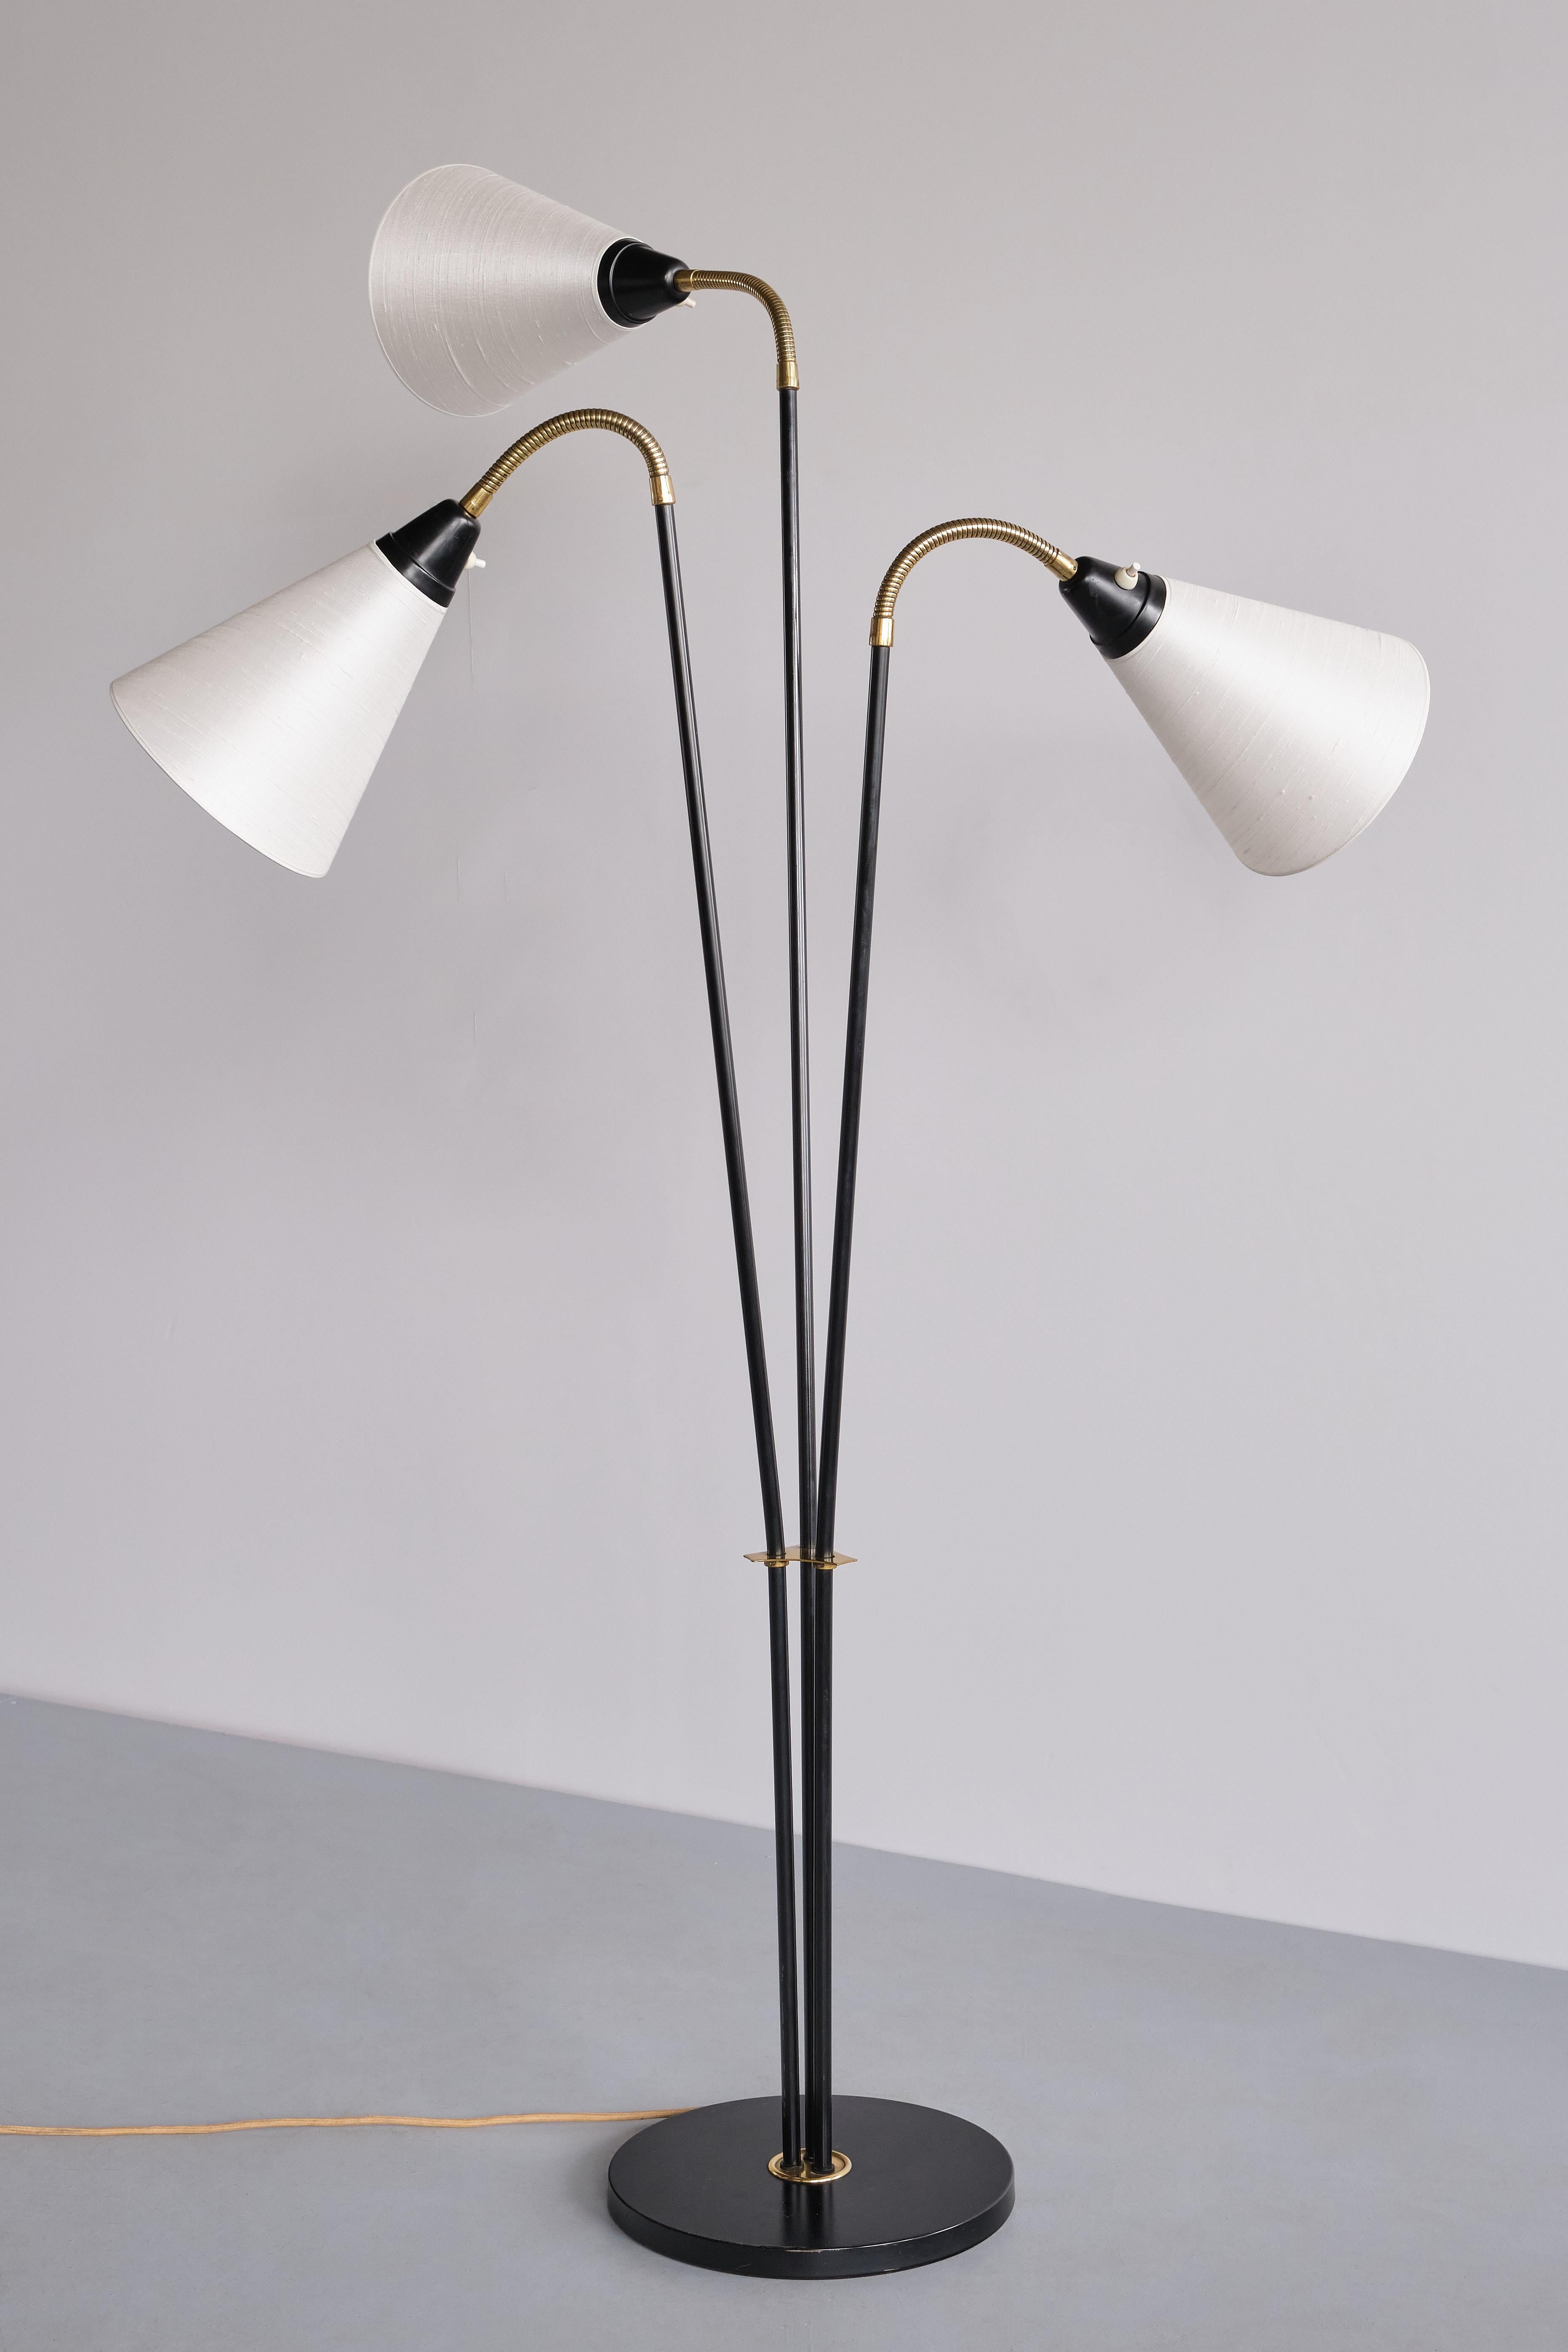 Mid-20th Century Swedish Modern Adjustable Three Arm Floor Lamp in Metal, Brass and Silk, 1950s For Sale